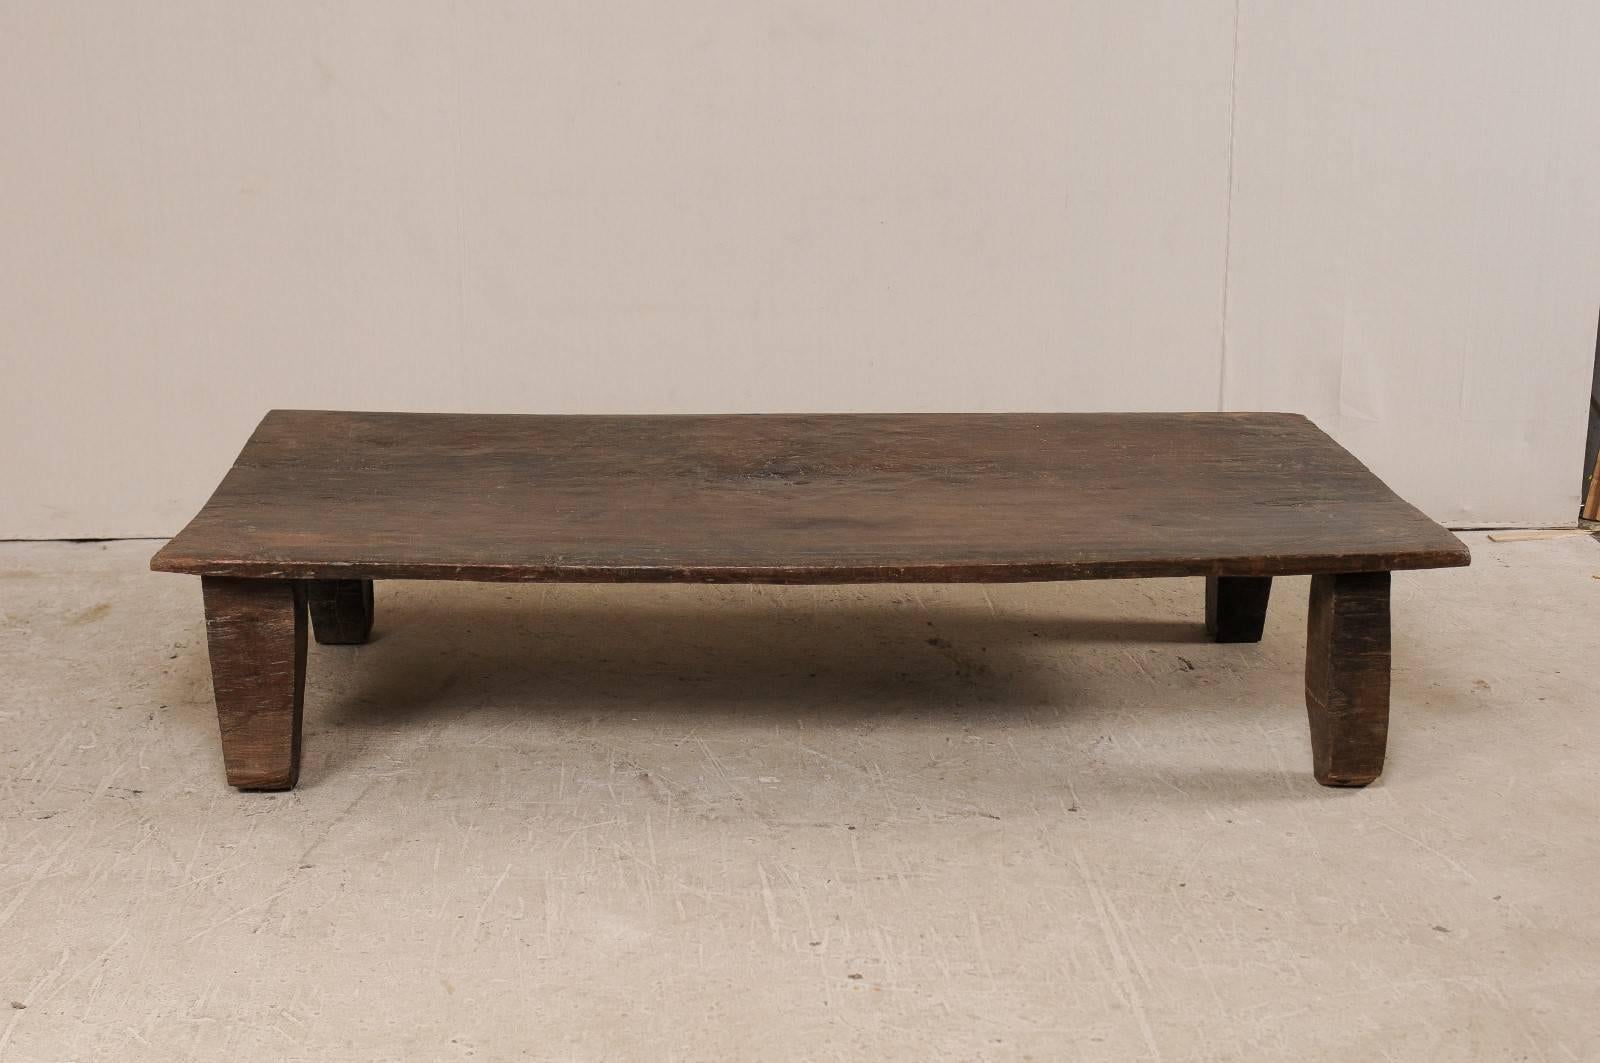 20th Century Beautiful Rustic Primitive Naga Wood Coffee Table from the Tribes of North India